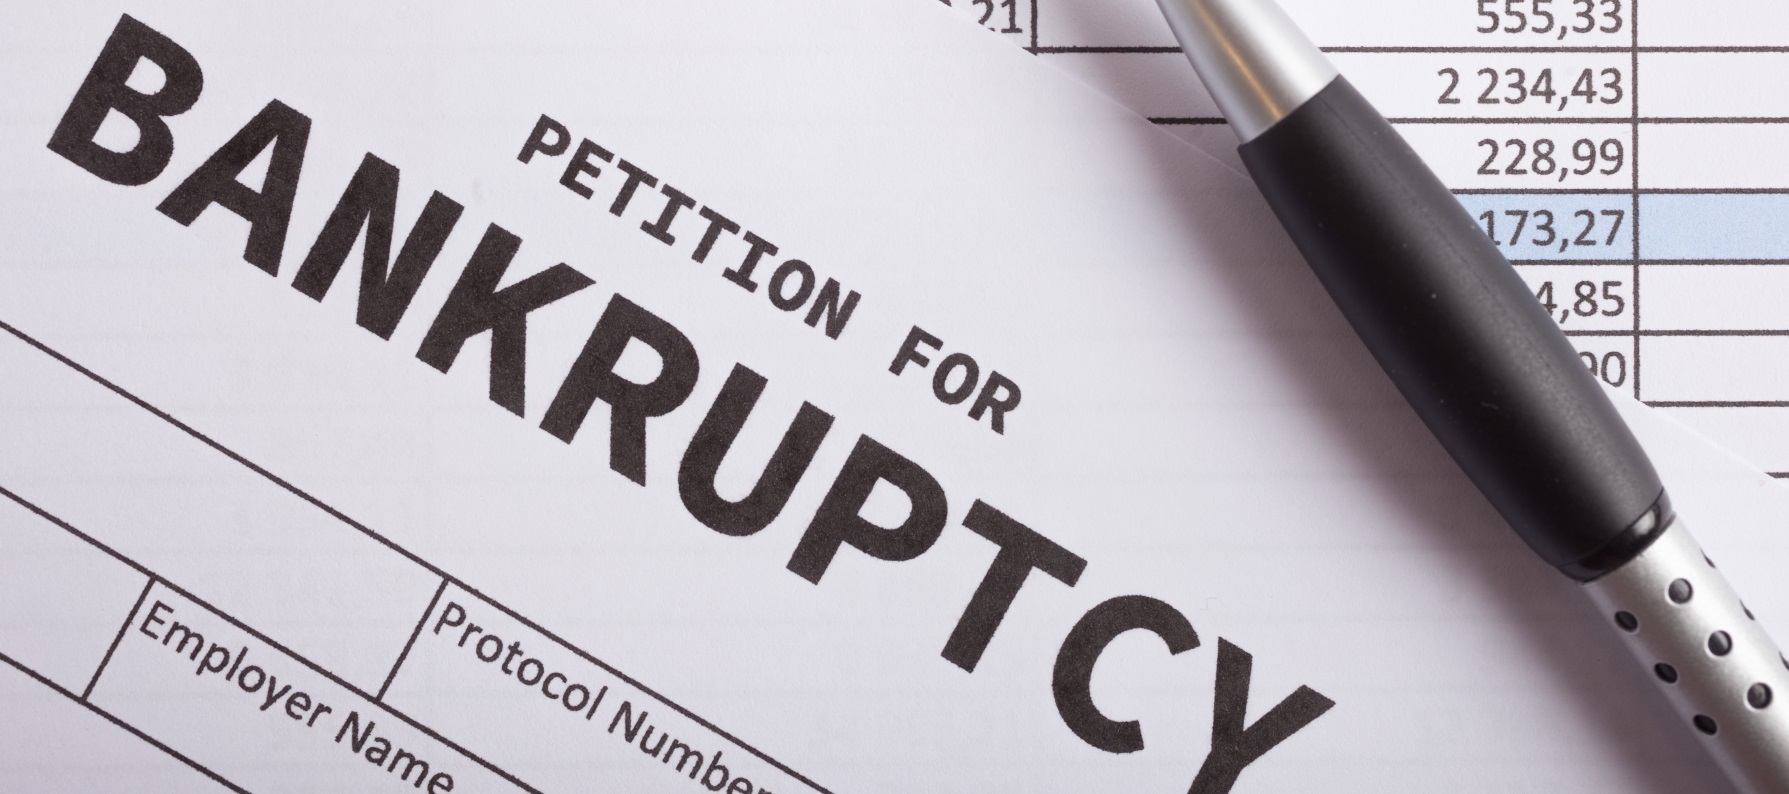 Petition For Bankruptcy - Meredith Law Firm, LLC - Chapter 7 Bankruptcy - Myrtle Beach, S.C.